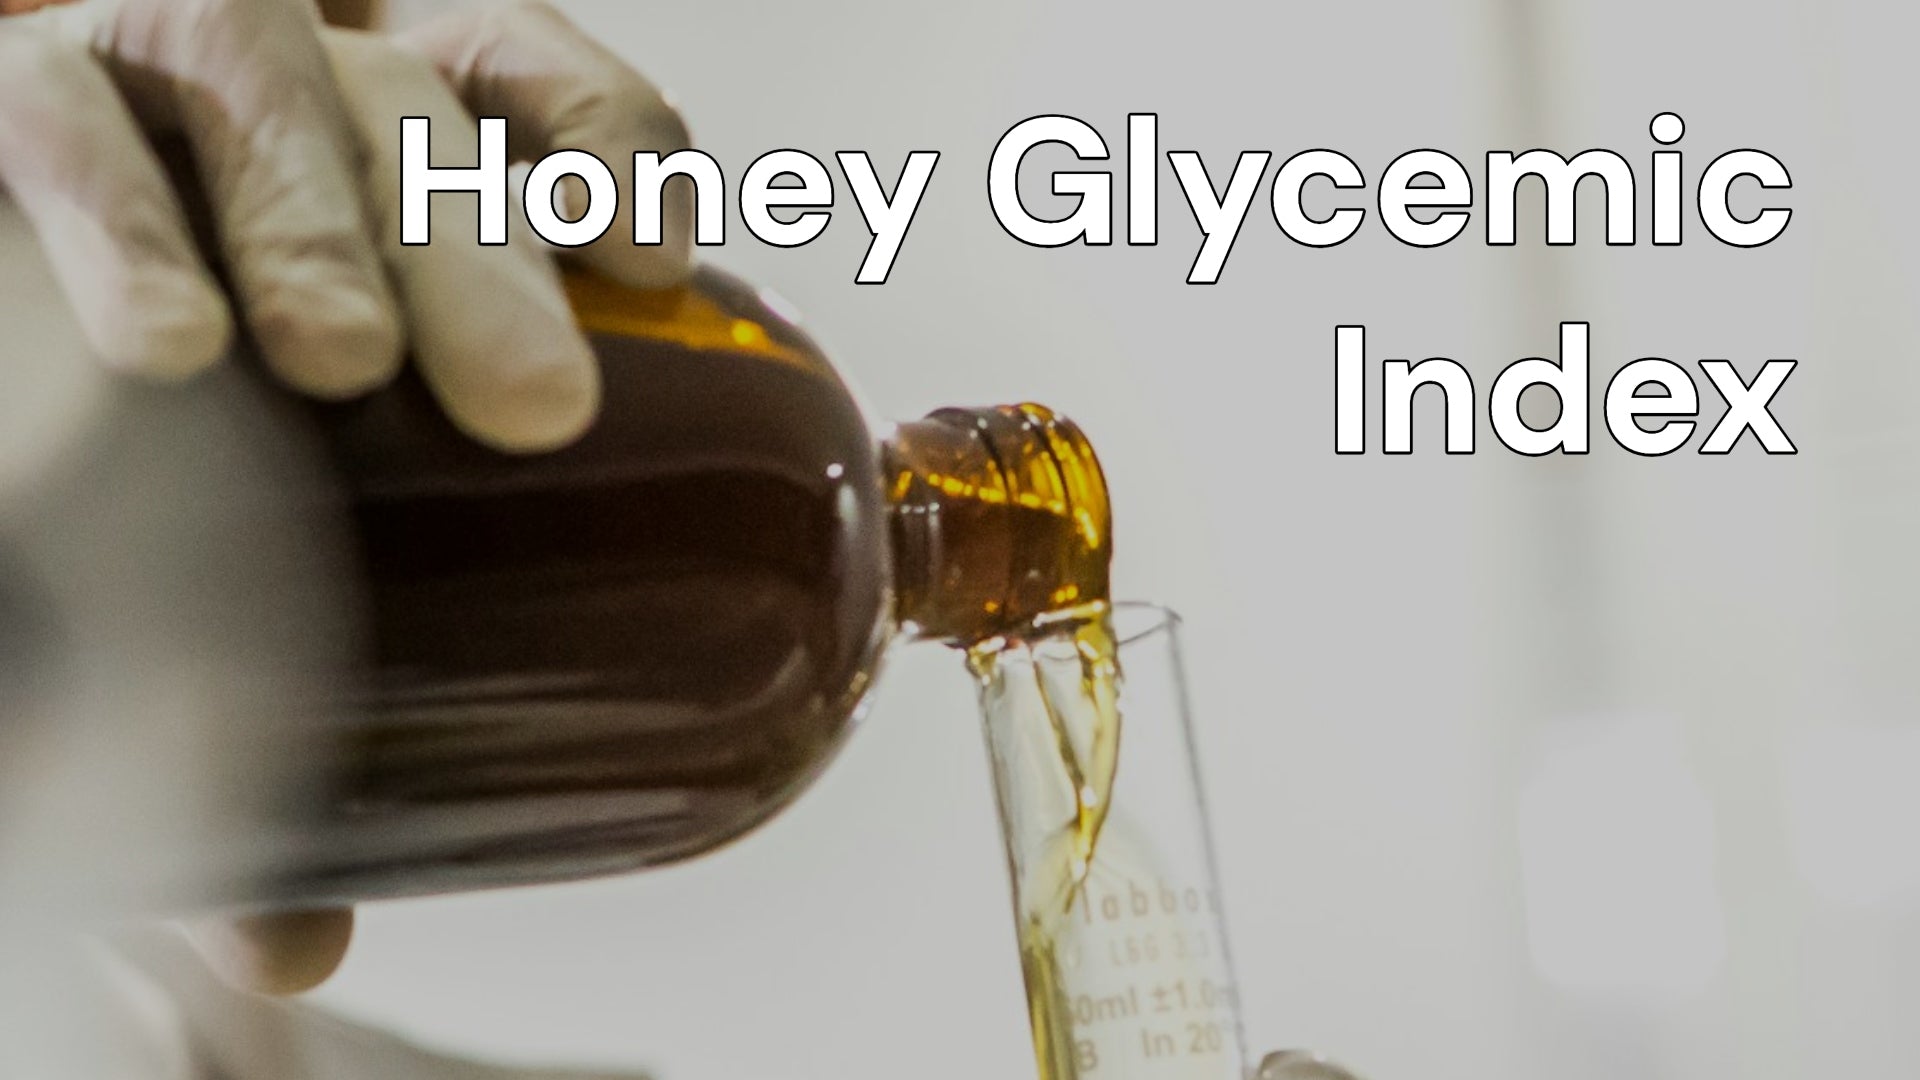 What is the Glycemic Index of Honey?